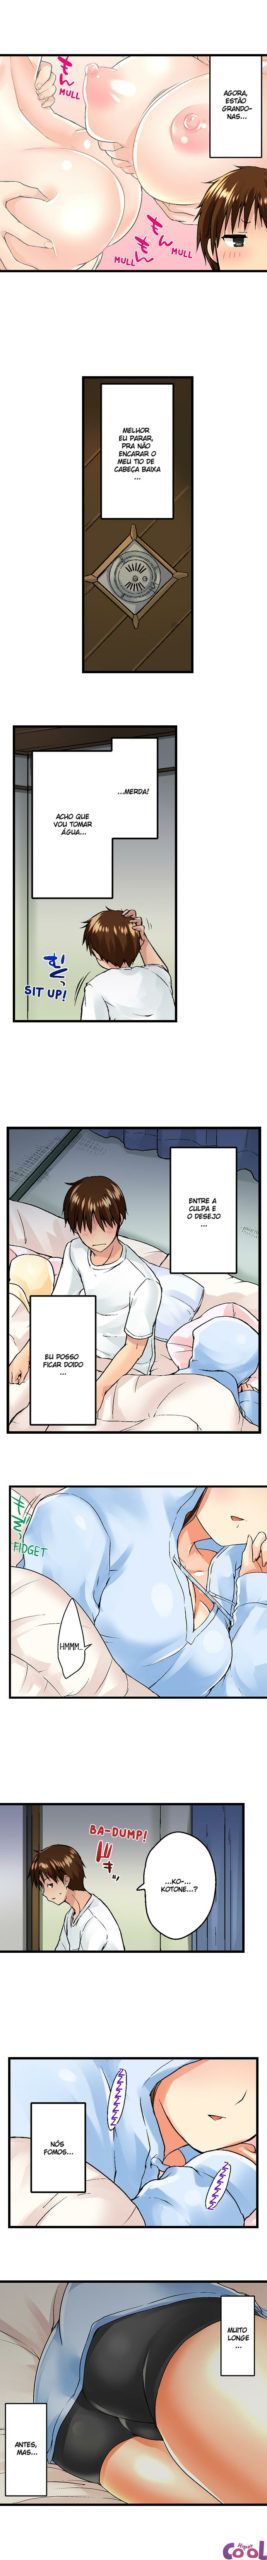 my-brothers-slipped-inside-me-in-the-bathtub-chapter-04-page-3